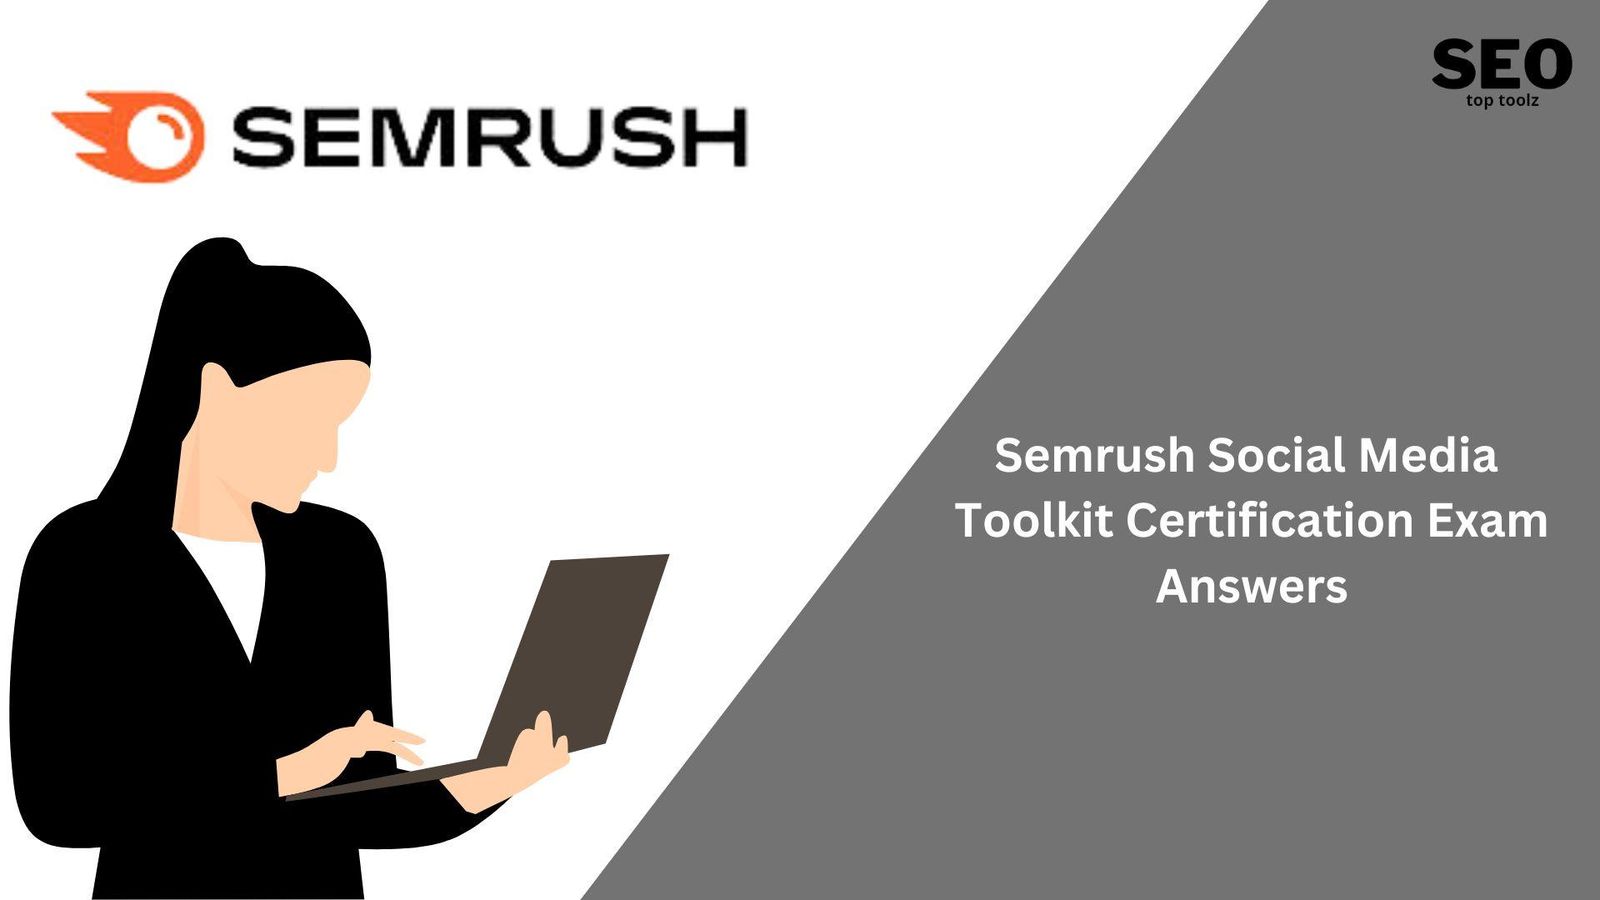 100% correct answers and covered every possible question of the exam for free., ad builder doesnt allow you to edit several ads simultaneously, amazon ates training center in kolkata, amazon product certification requirements, amazon seller university certification, choose 2 correct statements about the featured snippets report in the position tracking tool, competitive analysis and keyword research test answers, competitor analysis with semrush exam answers, connecting ga with seo dashboard we get traffic data based on, content marketing and seo fundamentals exam answers, digital garage answers 2022, digital marketing certification exam, digital marketing exam online, digital marketing for smbs certification, digital marketing for smbs certification answers, digital marketing for smbs certification which tool should you use in order to see the sources where your competitor published display ads, digital marketing professional certification answers, EMrush Local SEO Exam Answers, for local seo citations are, fundamentals of digital marketing final exam answers 2022, google ads certification answers 2022, google ads display assessment answers 2022, google ads display certification answers 2022, google ads search assessment answers 2022, google ads search certification answers, google analytics certification answers 2022, google analytics individual qualification exam answers 2022, google digital garage answers, google digital garage final exam answers 2022, google digital marketing answers 2022, google digital marketing course answers, google digital marketing final exam answers 2022, google digital marketing garage certification final exam answers 2022, google digital unlocked answers, Google Exam Answers, google fundamentals of digital marketing answers 2022, google garage digital marketing answers 2022, how do you know if you need local seo, how do you quickly check if all the issues related to redirect loops and 404 errors are fixed, how to do keyword research semrush, how to do local seo marketing, how to get amazon seller certificate, how to use semrush for content marketing, how to use semrush for seo, Hubspot Inbound Marketing Certification Exam Answers 2022, keyword research and competitor analysis, local seo exam, mobile seo exam answers in hindi, name the solid local link building strategy, on page and technical seo test answers, online certificate exam, ppc exam, role of content and seo semrush, SEMrush, SEMrush Advanced Competitive Research, SEMrush Advanced Competitive Research Certification Answers, SEMrush Advanced Competitive Research Certification Exam Answers 2022, Semrush Advertising Toolkit Certification Exam Answers 2022, semrush advertising toolkit exam answers, SEMrush Advertising Toolkit Test, semrush amazon, SEMrush Backlink Management Exam Answers 2022, SEMrush Backlink Management Exam Answers 2022 - SEMrush Backlink Management Certification Test Answers 20212, semrush certification, semrush certification exam, SEMrush Competitive Analysis, semrush competitive analysis and keyword research test answers, semrush competitive analysis and keyword research test questions and answers, semrush content marketing and seo fundamentals exam answers, semrush content marketing fundamentals exam answers, semrush content marketing toolkit exam answers, semrush digital marketing certification, semrush exam answers, semrush for digital agencies certification answers, semrush interview questions, SEMrush Keyword Research, SEMrush Keyword Research Certification Answers 2022, semrush keyword research exam, SEMrush Link Building Test Answers, SEMrush Link Building Test Answers 2022, SEMrush Local SEO Certification Exam Answers 2022, semrush local seo exam, semrush local seo exam answers, SEMrush Management Reporting and Collaboration Exam Answers 2022, SEMrush Mobile SEO Certification Answers 2022, SEMrush Mobile SEO Exam, semrush mobile seo exam answers, SEMrush PPC Automation Certification Exam Answers 2022, semrush ppc automation exam answers, semrush ppc course, SEMrush PPC Fundamentals Exam Answers 2022, SEMrush Rank Tracking, SEMrush Rank Tracking Certification Exam Answers 2022, semrush rank tracking certification exam answers free, semrush rank tracking certification exam answers free download, semrush rank tracking certification exam answers pdf, SEMrush Rank Tracking Test Answers, SEMrush Role of Content, semrush role of content exam answers, SEMrush Role Of Content Exam Questions and Answers 2022, Semrush SEO Fundamentals Answers, semrush seo fundamentals exam answers, semrush seo score, semrush seo test, semrush seo toolkit, SEMrush SEO Toolkit Answers, semrush seo toolkit exam, semrush site audit course, semrush site audit exam answers, SEMrush Site Audit Exam Questions and Answers 2022, semrush smm, Semrush Social Media Toolkit Certification Exam Answers 2022, semrush social media toolkit exam, semrush social media toolkit exam answers, SEMrush Social Media Toolkit Test, SEMrush Technical SEO, semrush technical seo exam answers, seo exam online, smm fundamentals exam answers, start selling on amazon from pakistan, This free exam consists of only MCQ questions that help ensure you to learn about Competitive Analysis, what are the downsides of using a blog to publish evergreen content choose two answers, what are the requirements for smart display conversions, what is seo semrush, what is the difference between max conversions and target cpa, which bidding strategy is not eligible for display campaigns, which campaign types have smart campaign variations choose three options, which report can be useful for starting an advertising campaign